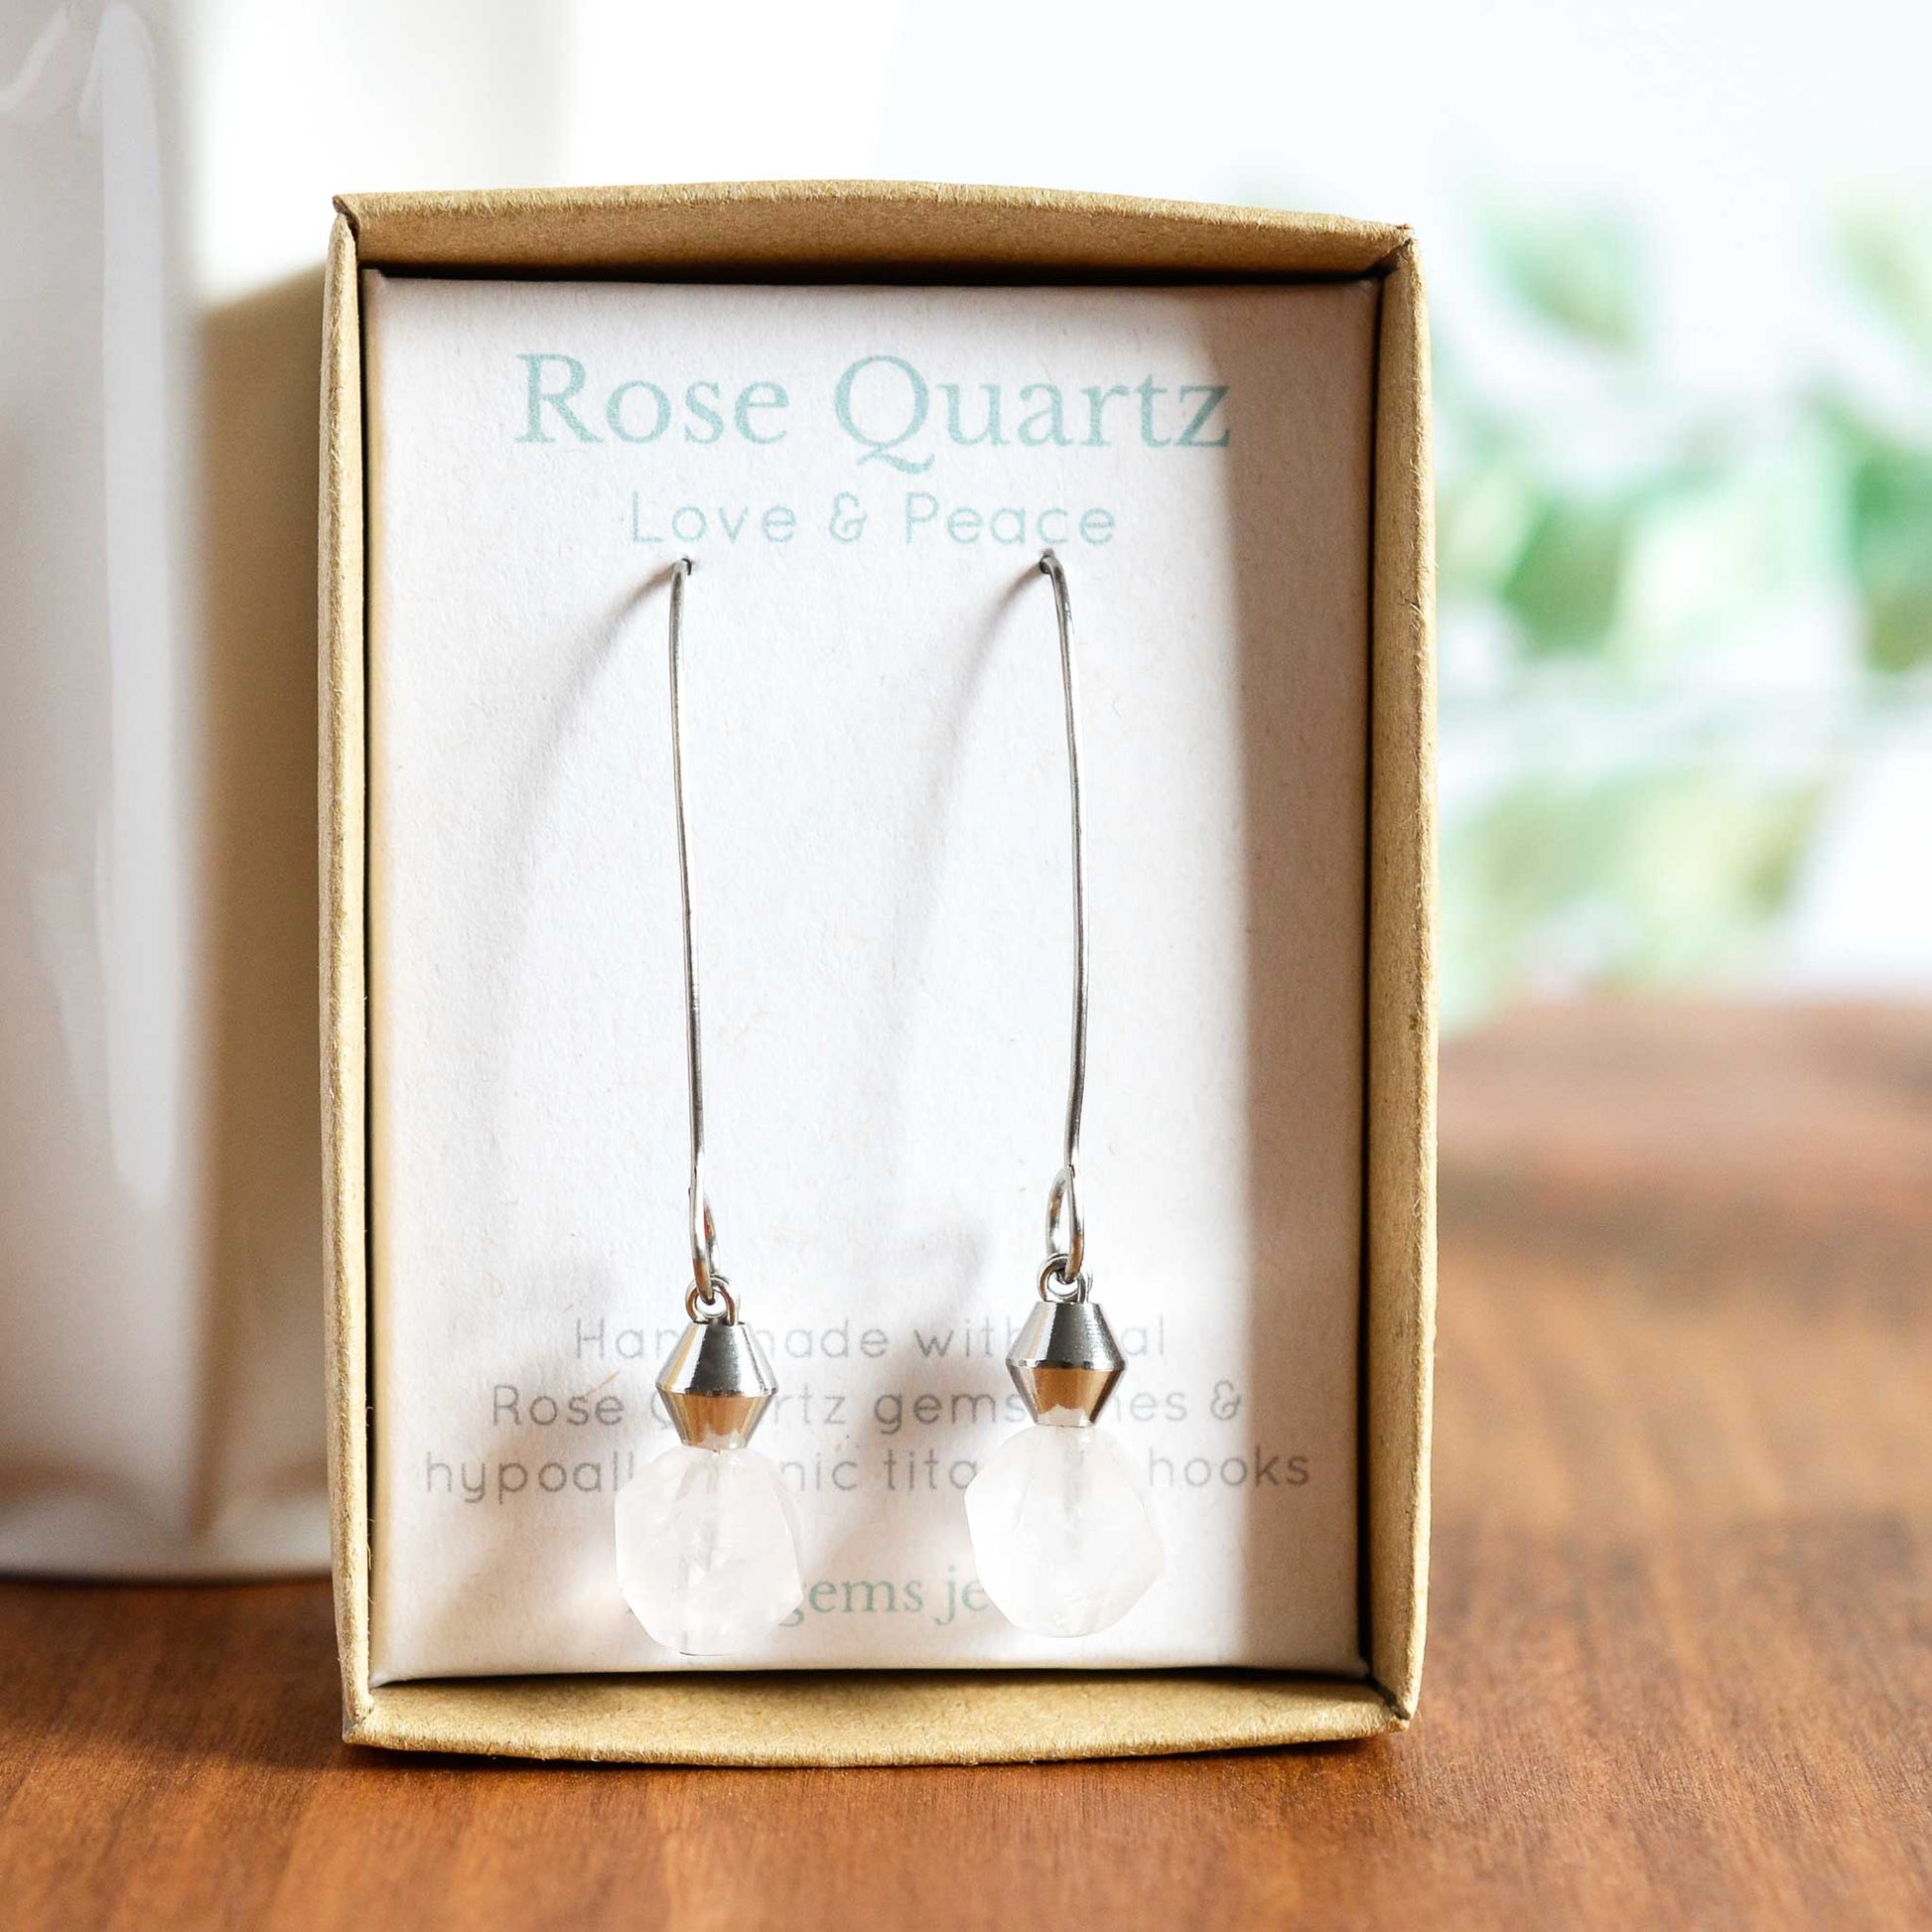 Rose Quartz for love and peace gemstone drop earrings in eco friendly gift box.